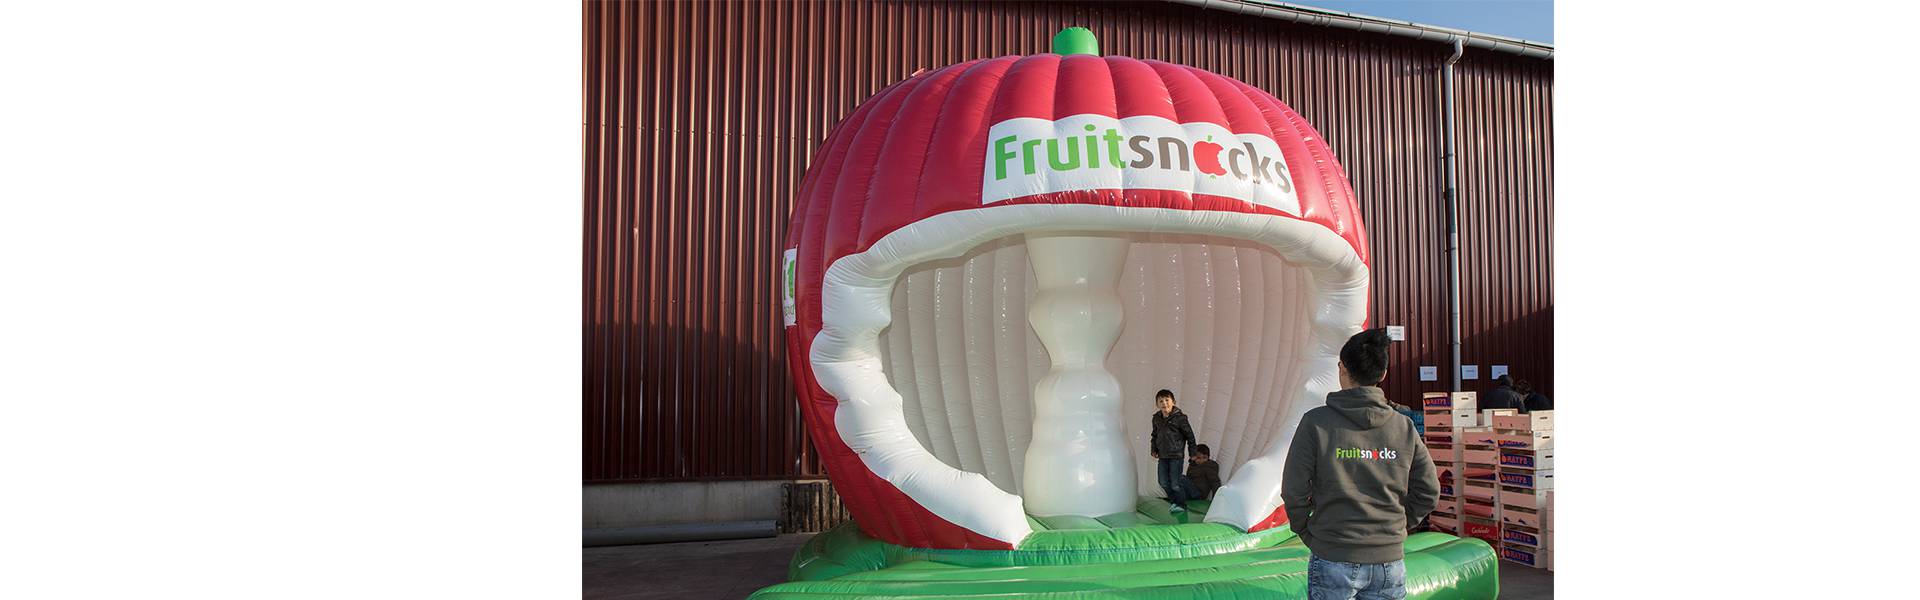 Large inflatable promotional material | X-Treme Creations 3D apple shaped bouncy castle with a nibbled bell house Fruitsnacks X-Treme Creations